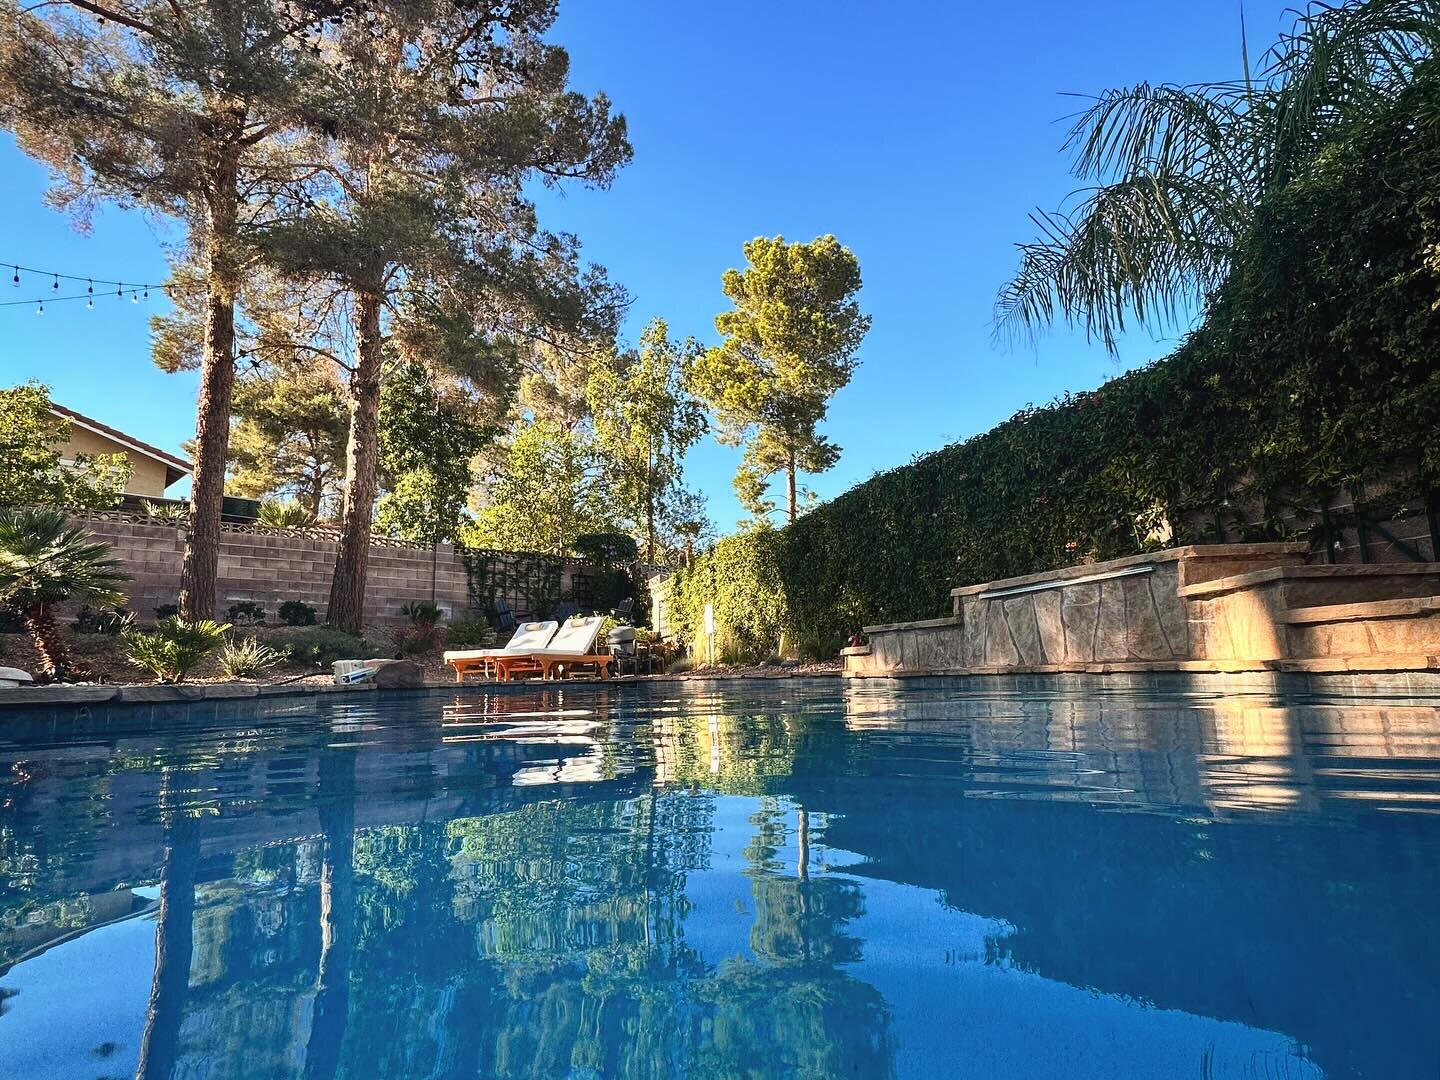 Healing. That&rsquo;s the plan.

It&rsquo;s been exactly a month since I arrived back home in Vegas after almost 3 months in the UK.

This gorgeous back garden and pool has helped, that&rsquo;s for sure. But I still want to share every photo I take o